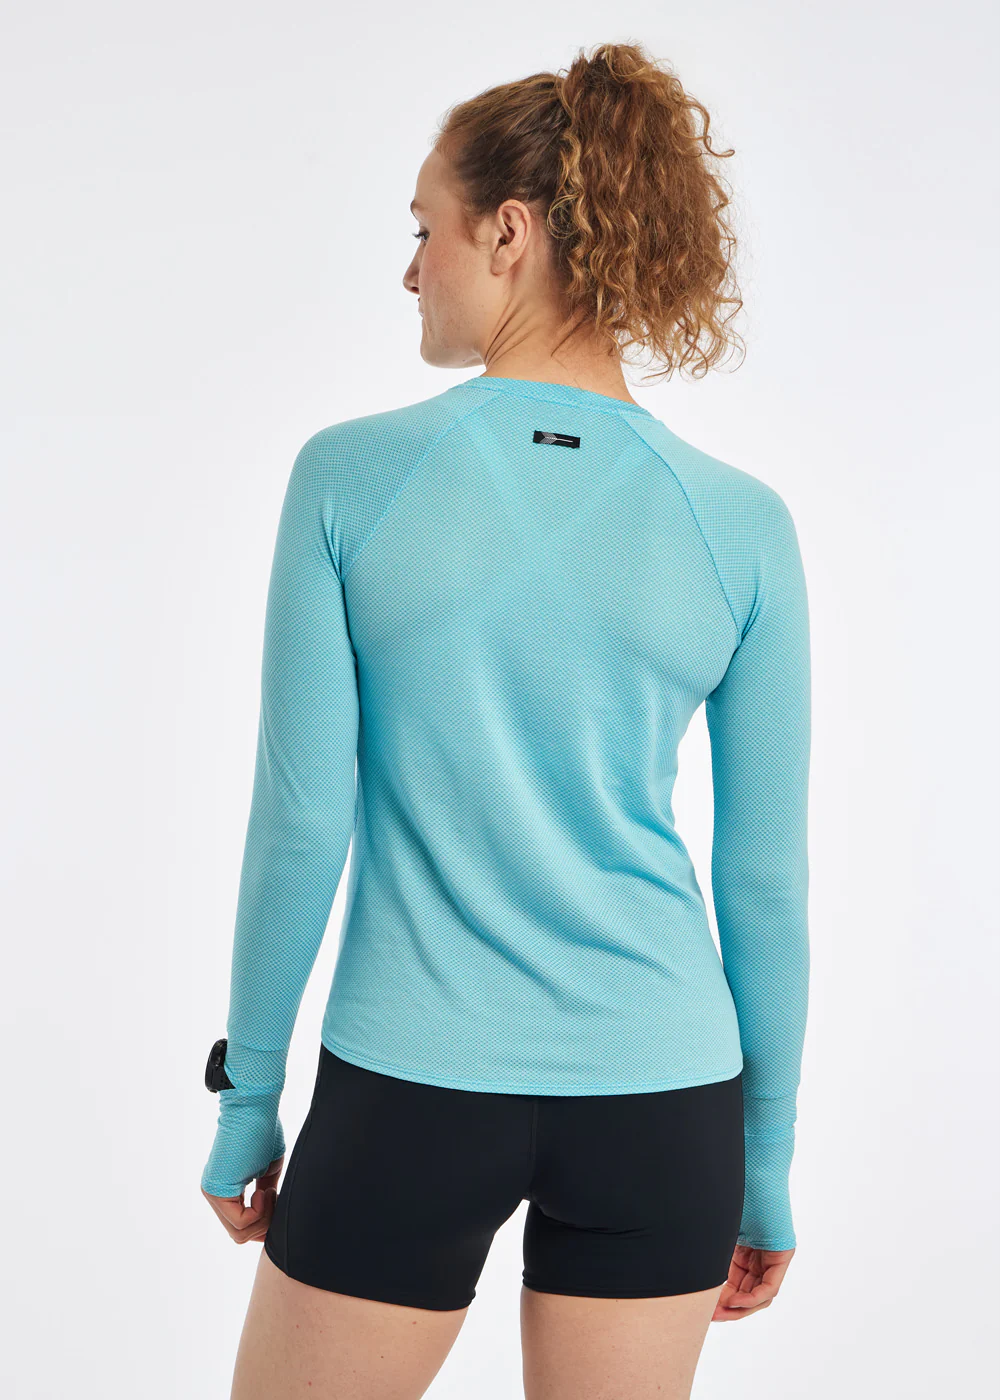 Flyout Wool Long Sleeve  Oiselle Running and Athletic Apparel for